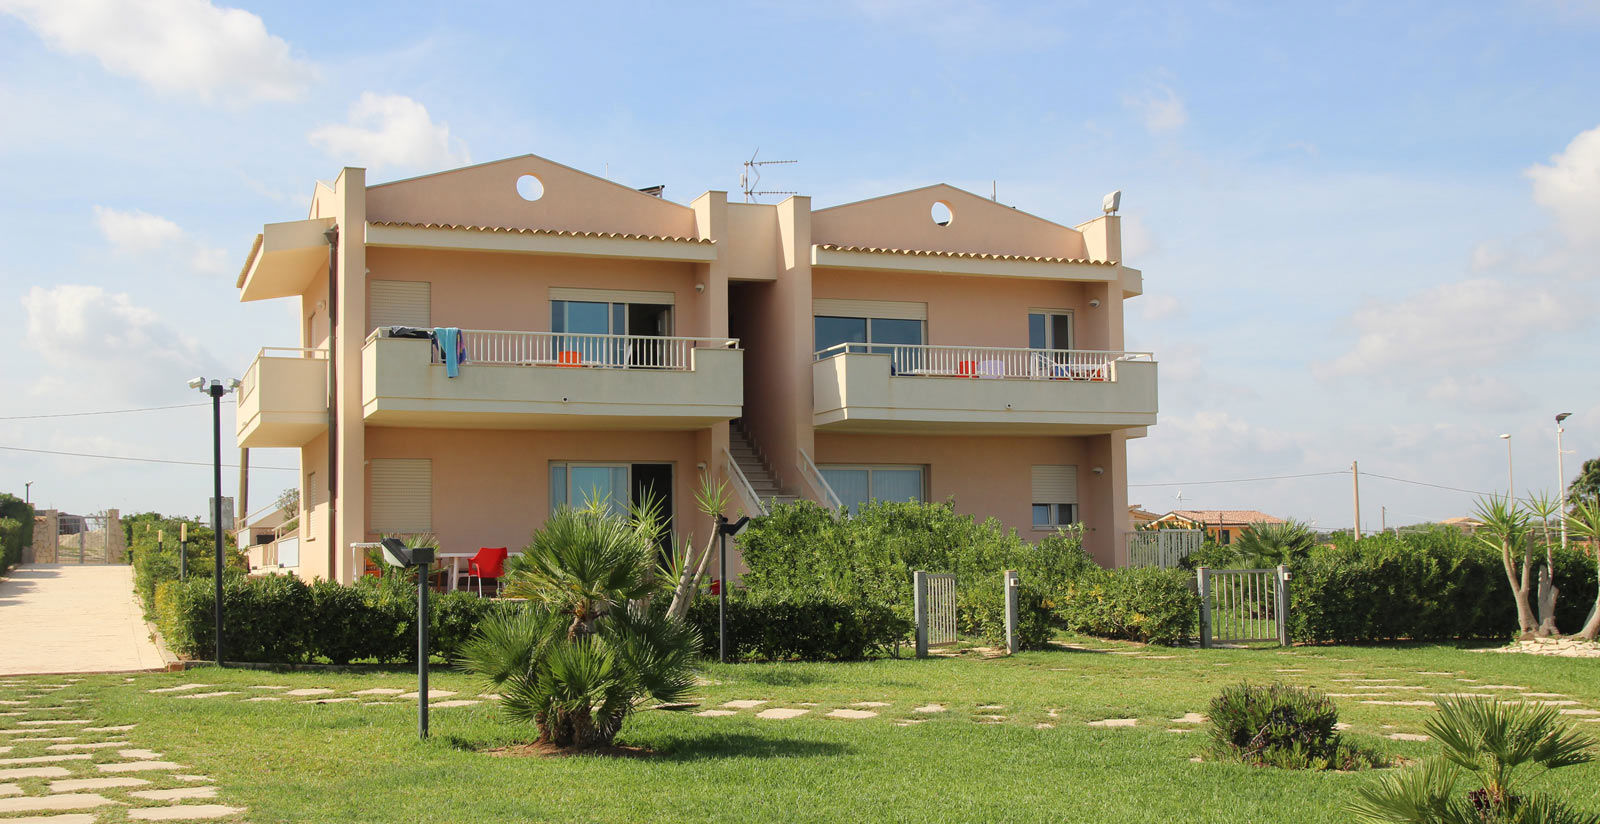 Apartments with outdoor play equipment for kids in val di noto sicily 4